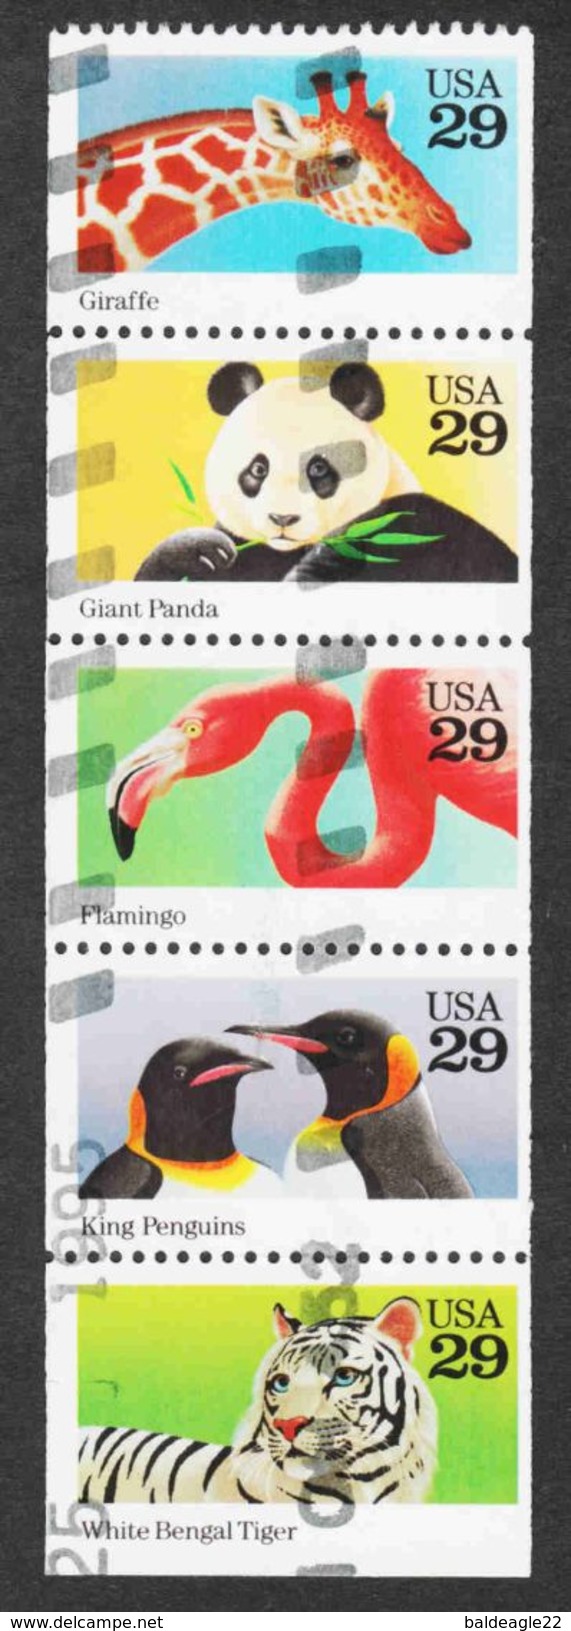 United States - Scott #2709a Used - Booklet Pane - 1981-...